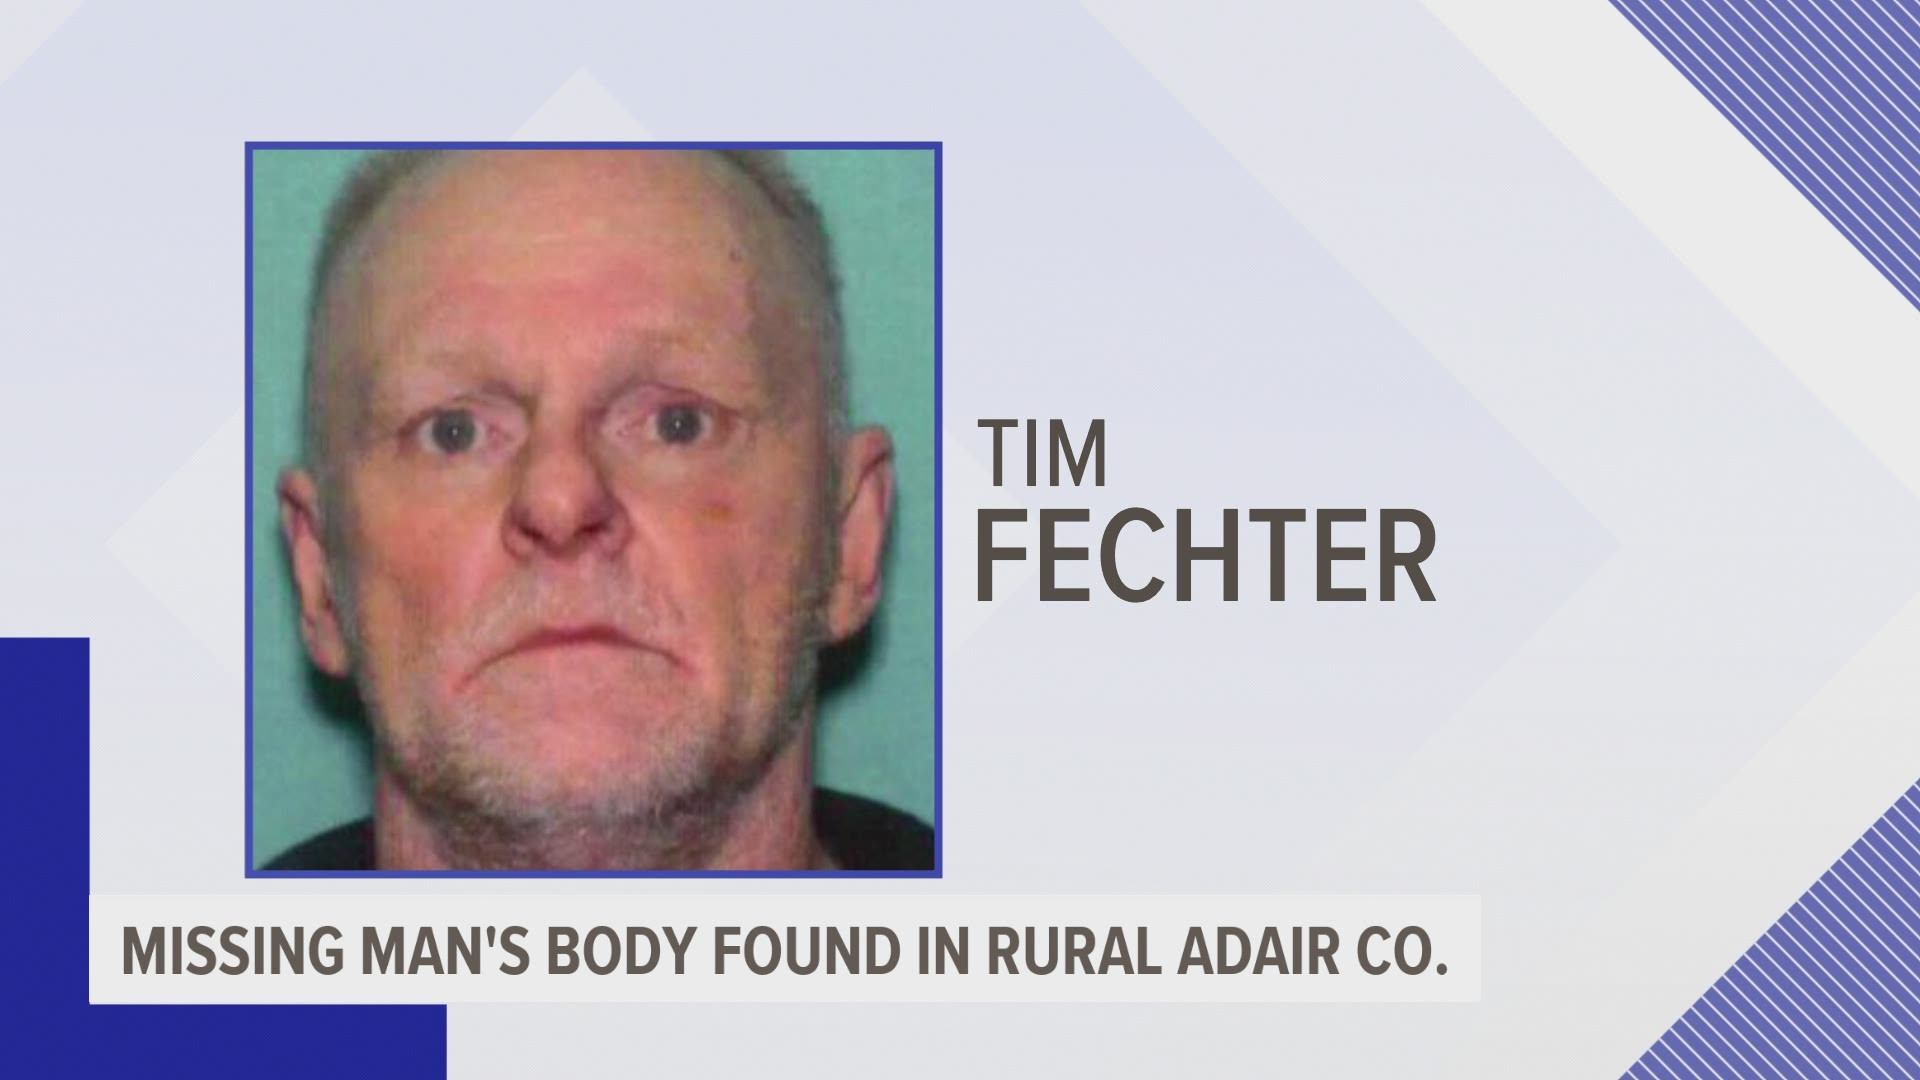 The State Medical Examiner's Office has yet to release an exact cause and manner of death for Timothy Fetcher.